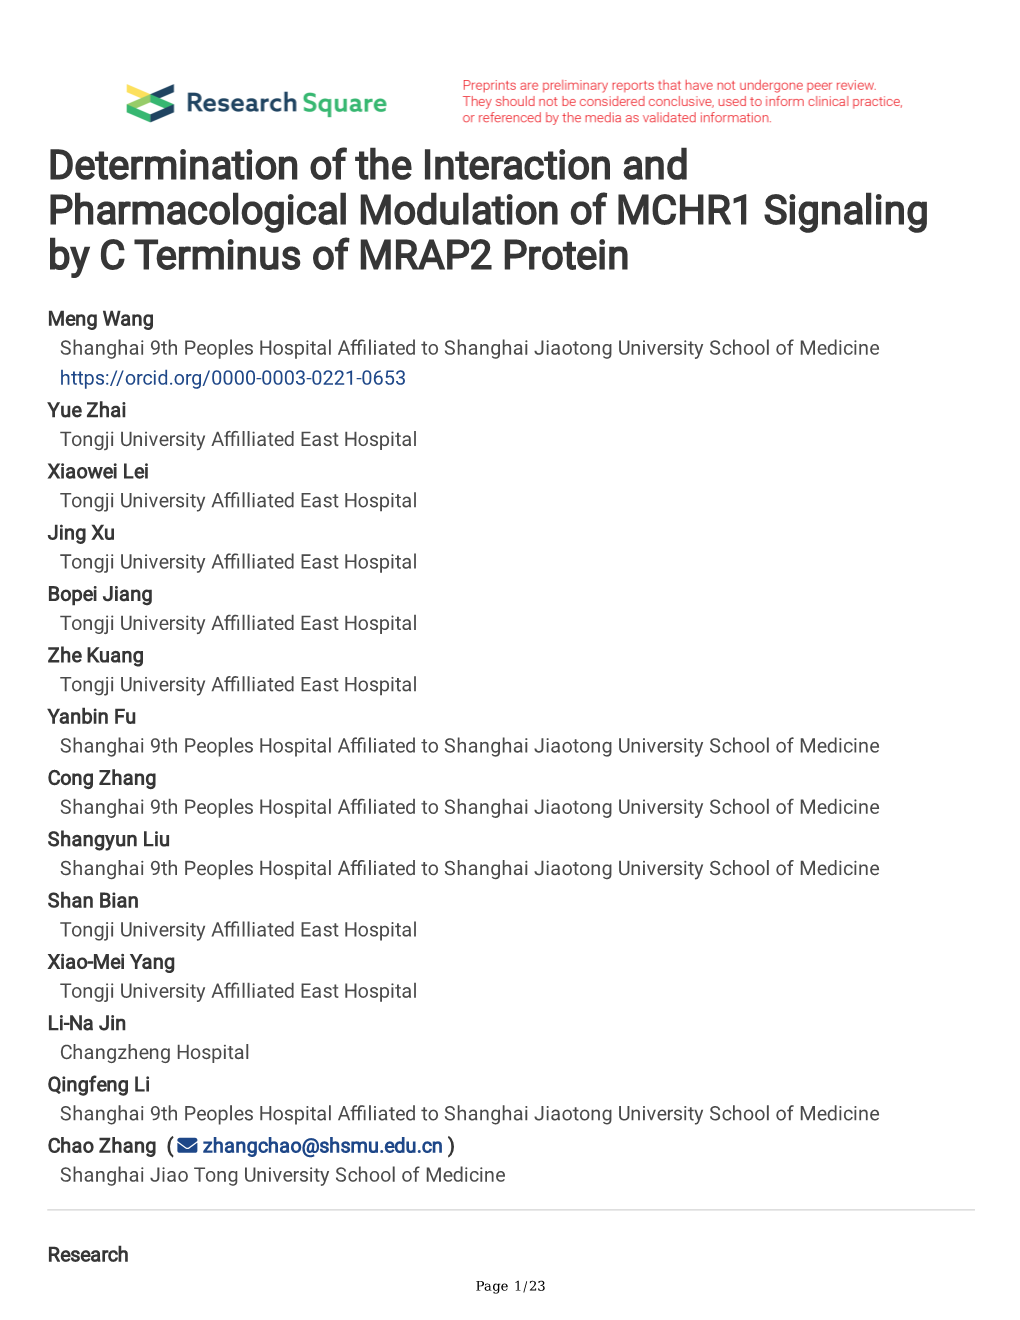 Determination of the Interaction and Pharmacological Modulation of MCHR1 Signaling by C Terminus of MRAP2 Protein